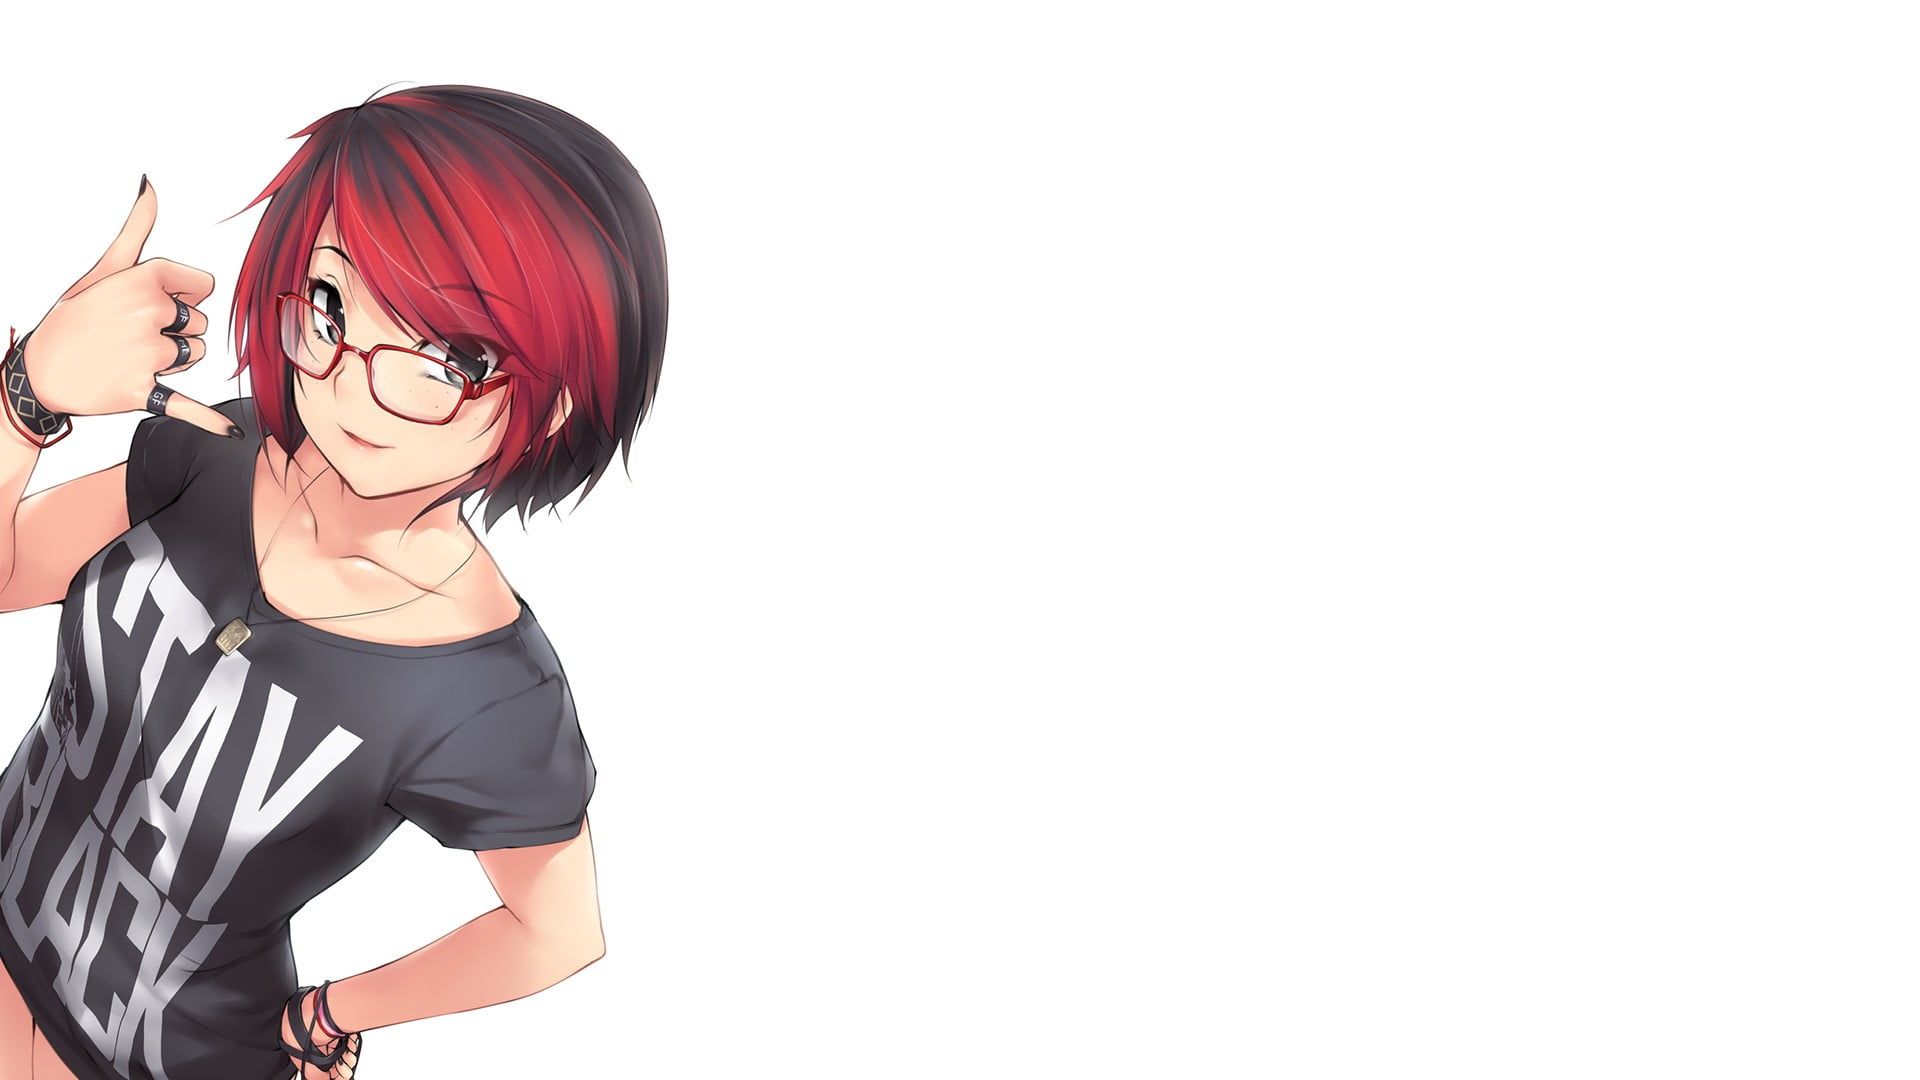 Girl Anime Character With Red Short Hair Hd Wallpaper Wallpaper